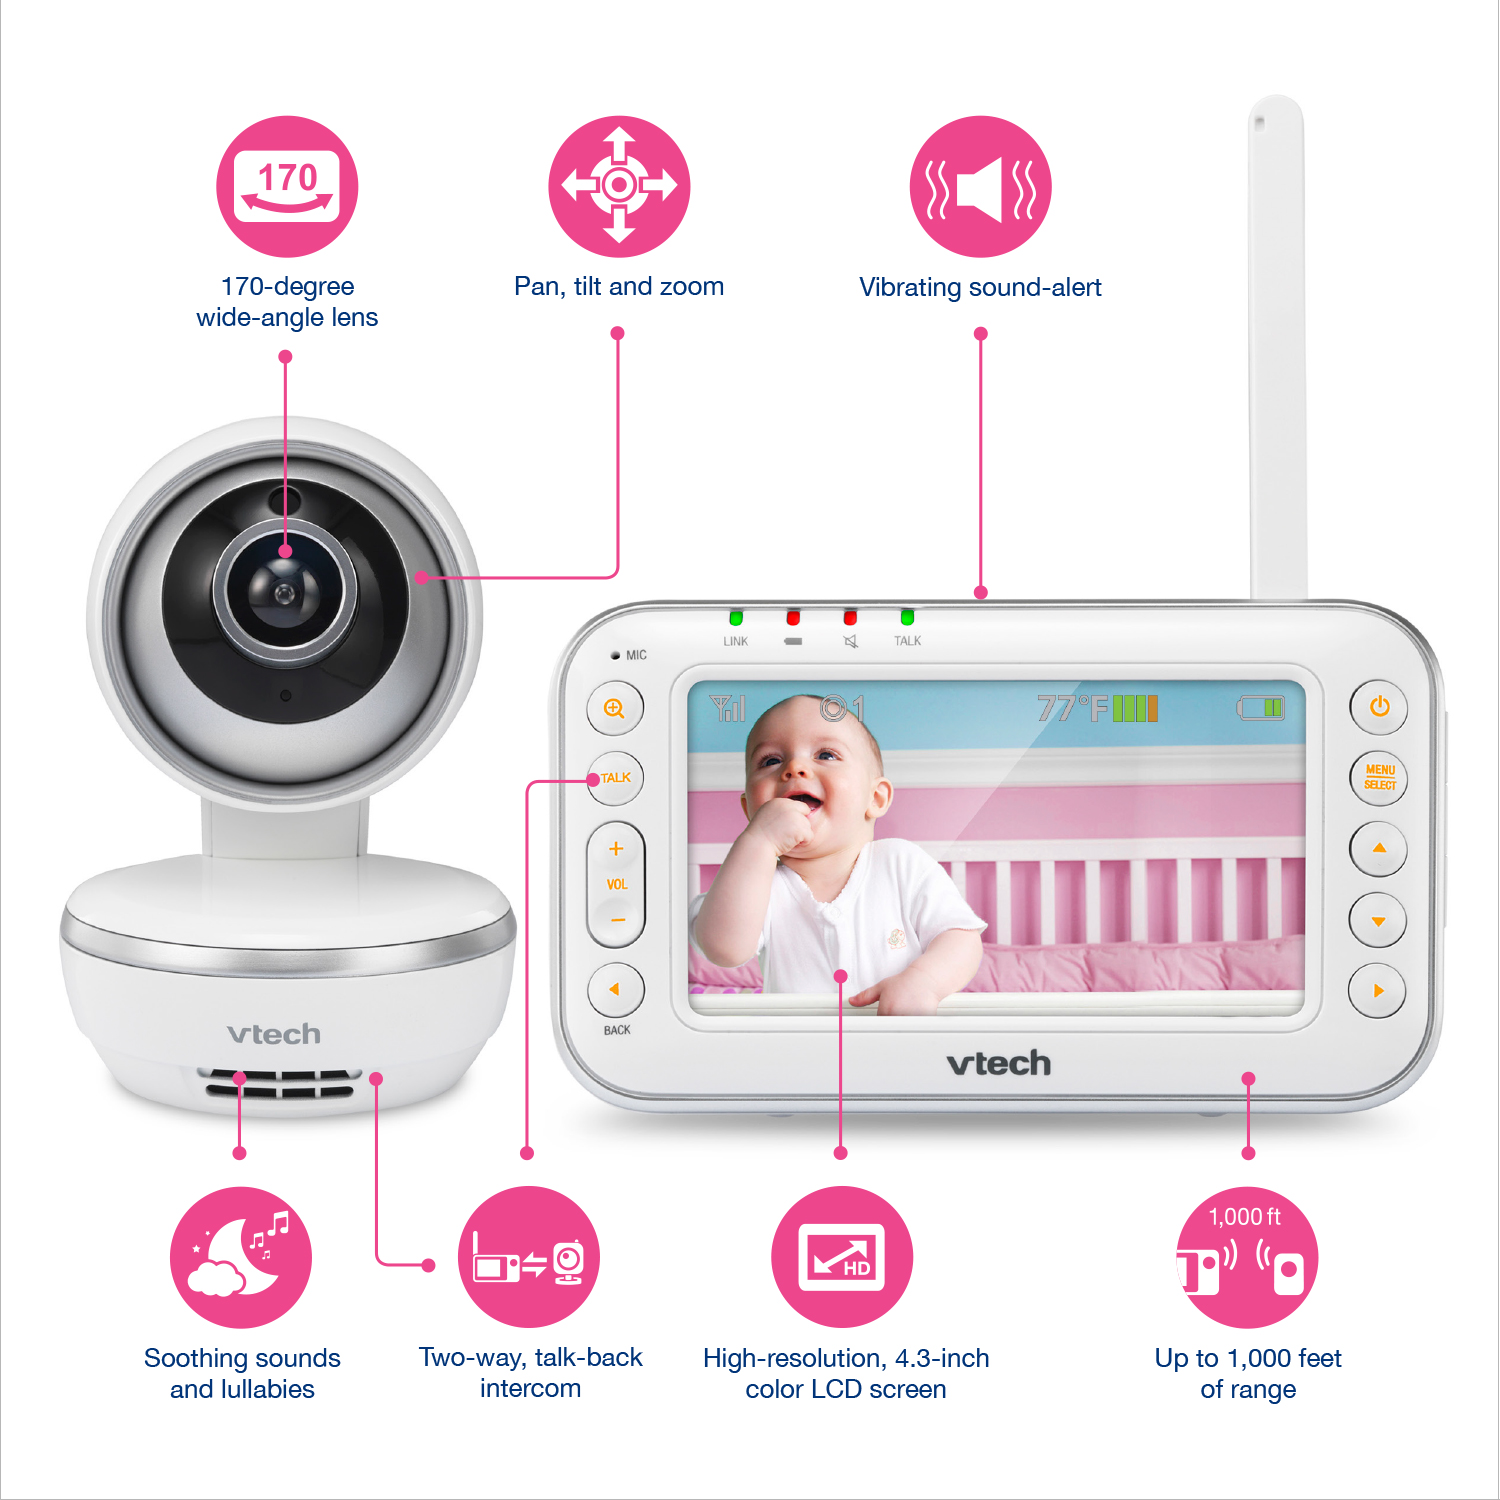 VTech VM4261, 4.3" Digital Video Baby Monitor with Pan & Tilt Camera, Wide-Angle Lens and Standard Lens, White - image 10 of 13